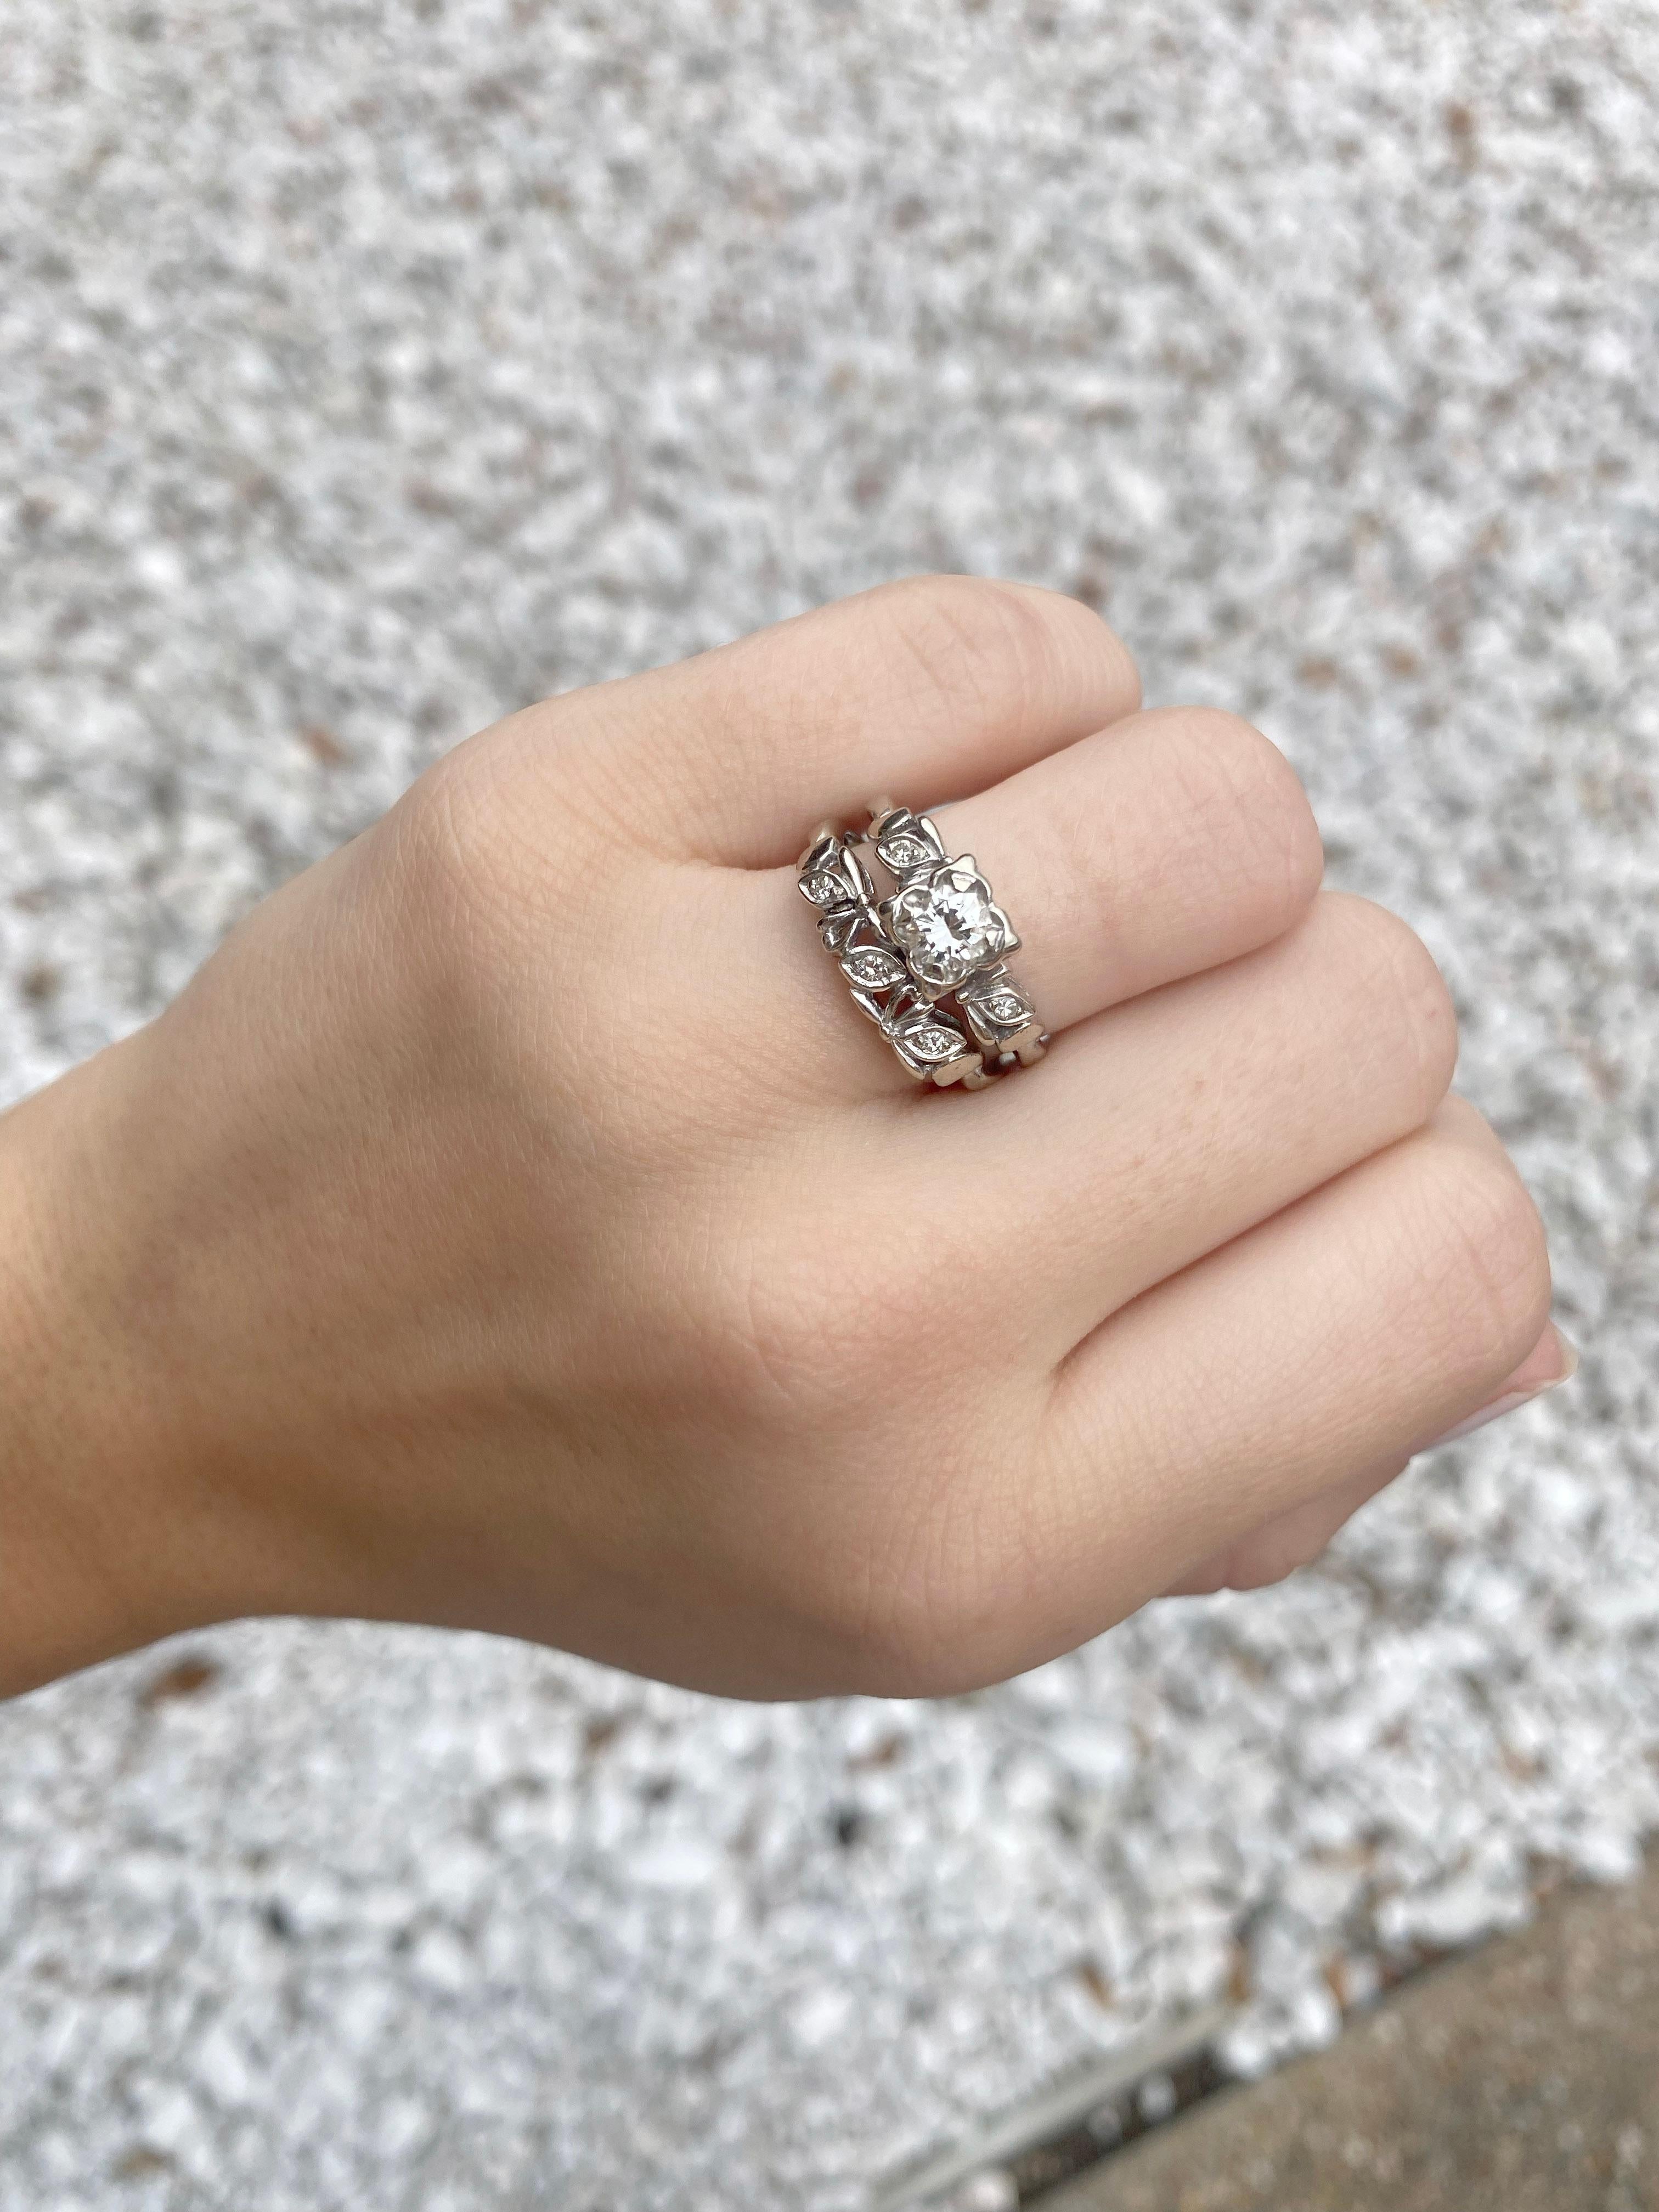 This CIRCA 1953 estate engagement ring and wedding band is stunning! With an almost half carat diamond set in the center (0.44 ct) in the original setting. This ring has all the original diamonds and metal! It's in fantastic shape and still look as